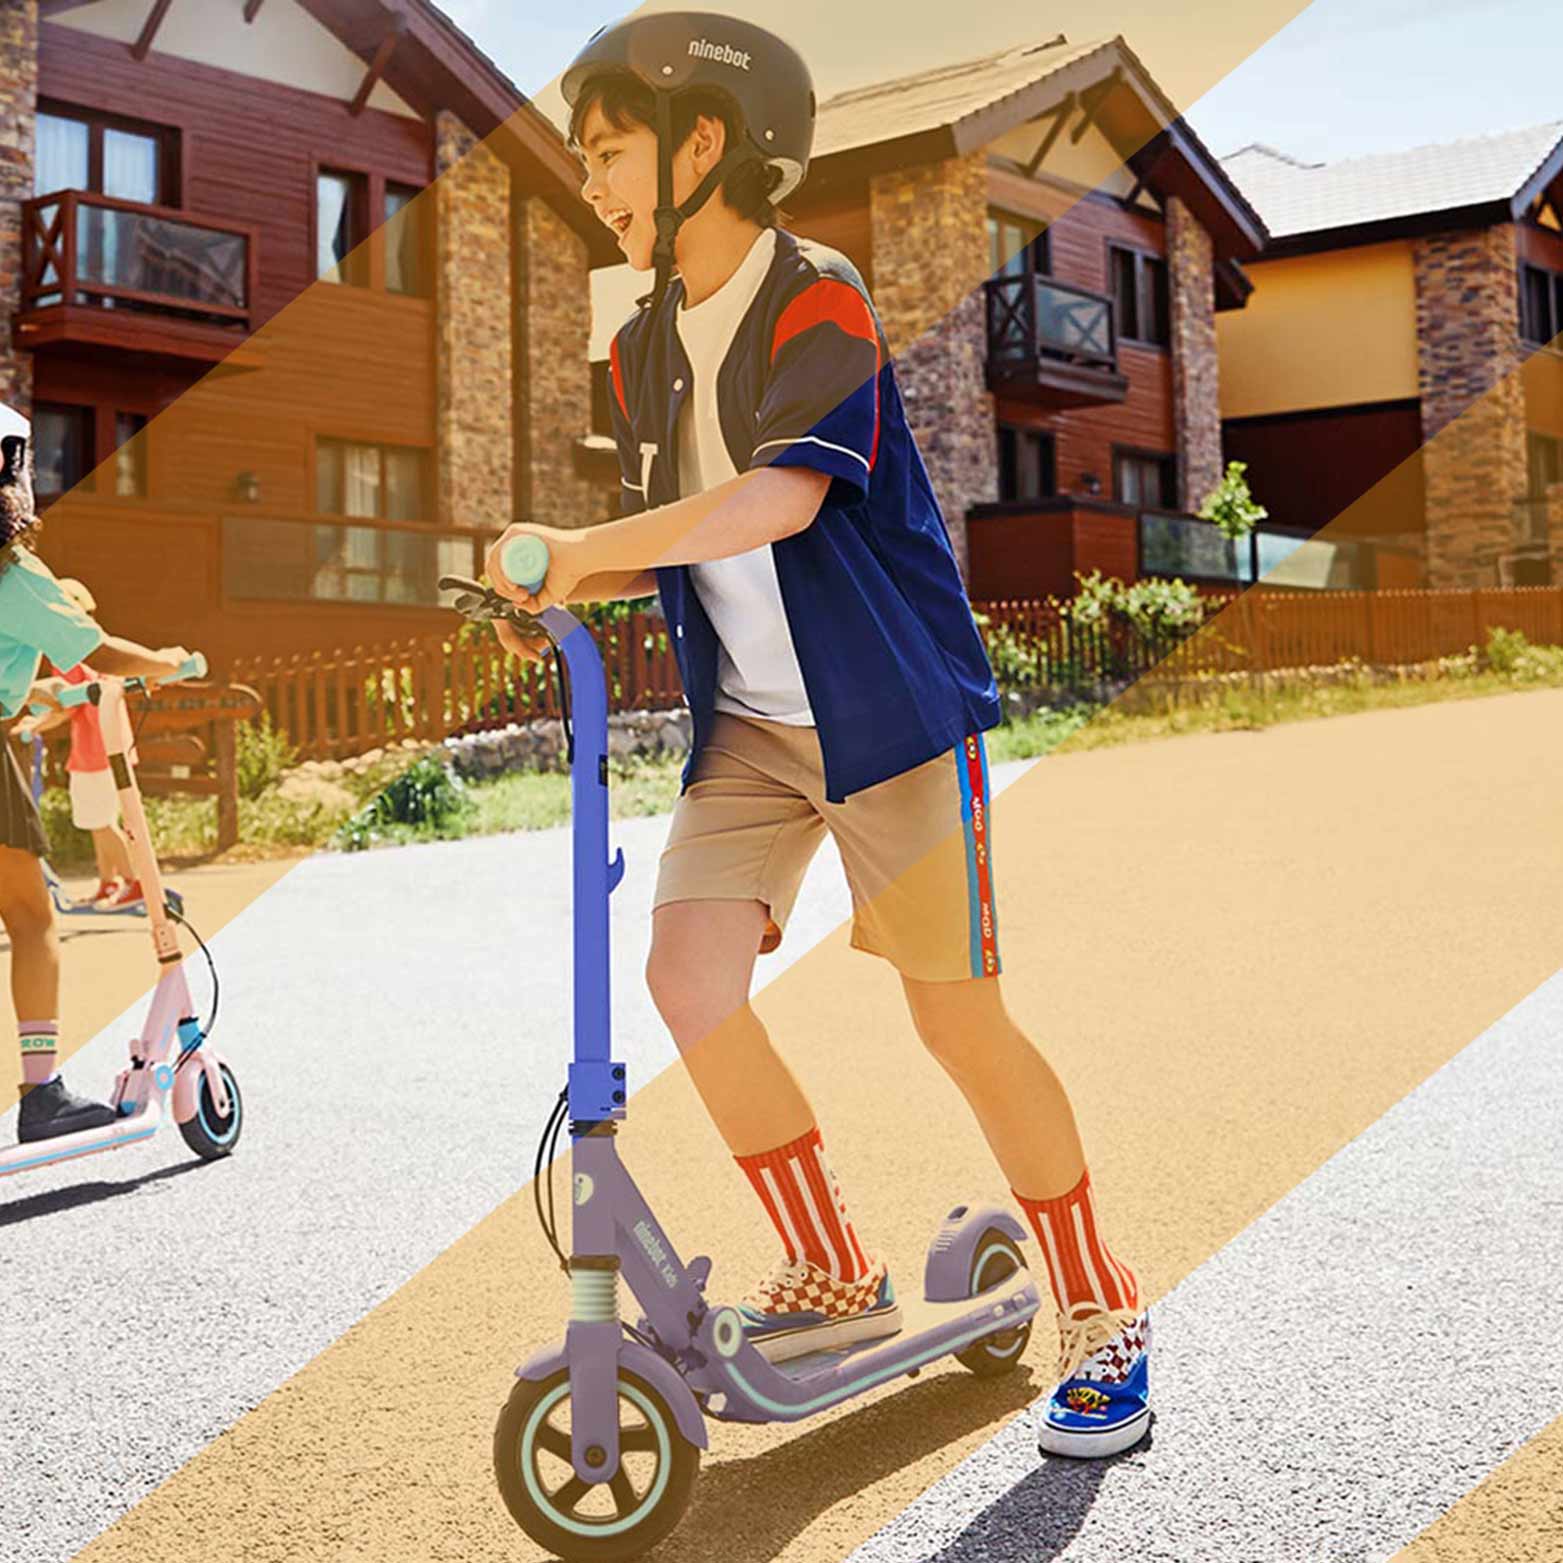 Common Frequently Asked Questions About Electric Scooters